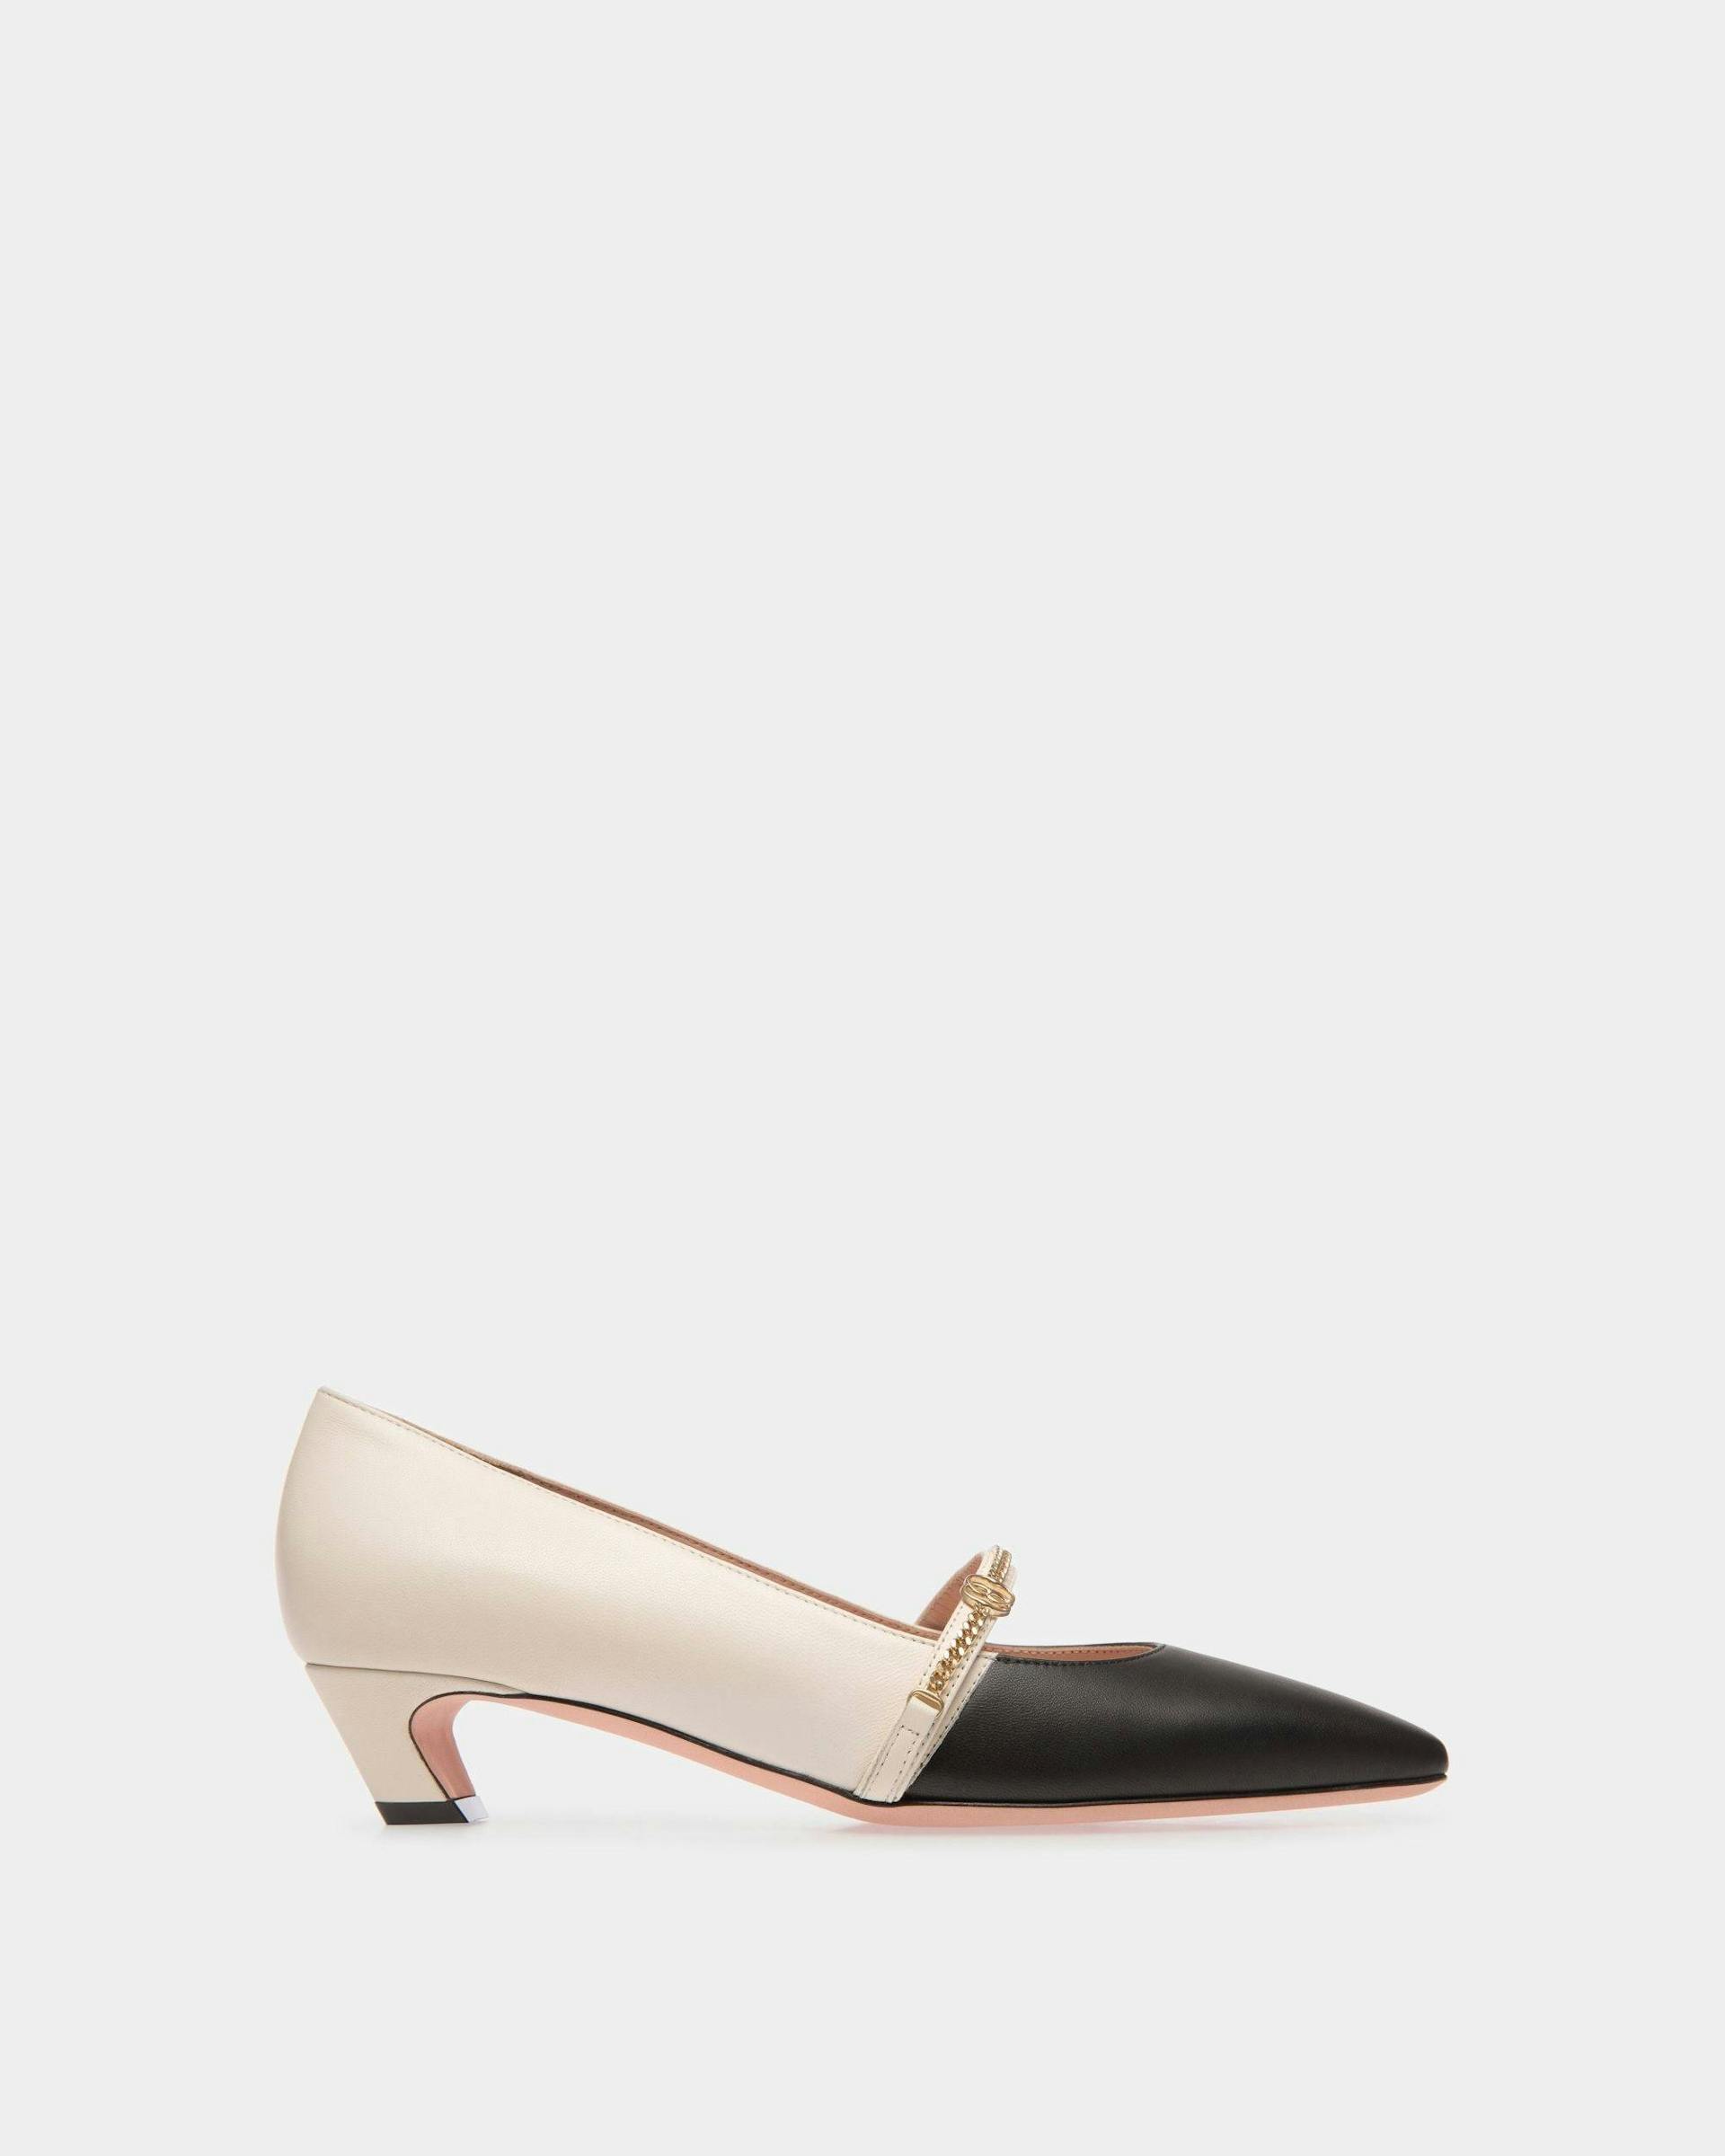 Women's Sylt Mary-Jane Pump In Black And White Leather | Bally | Still Life Side